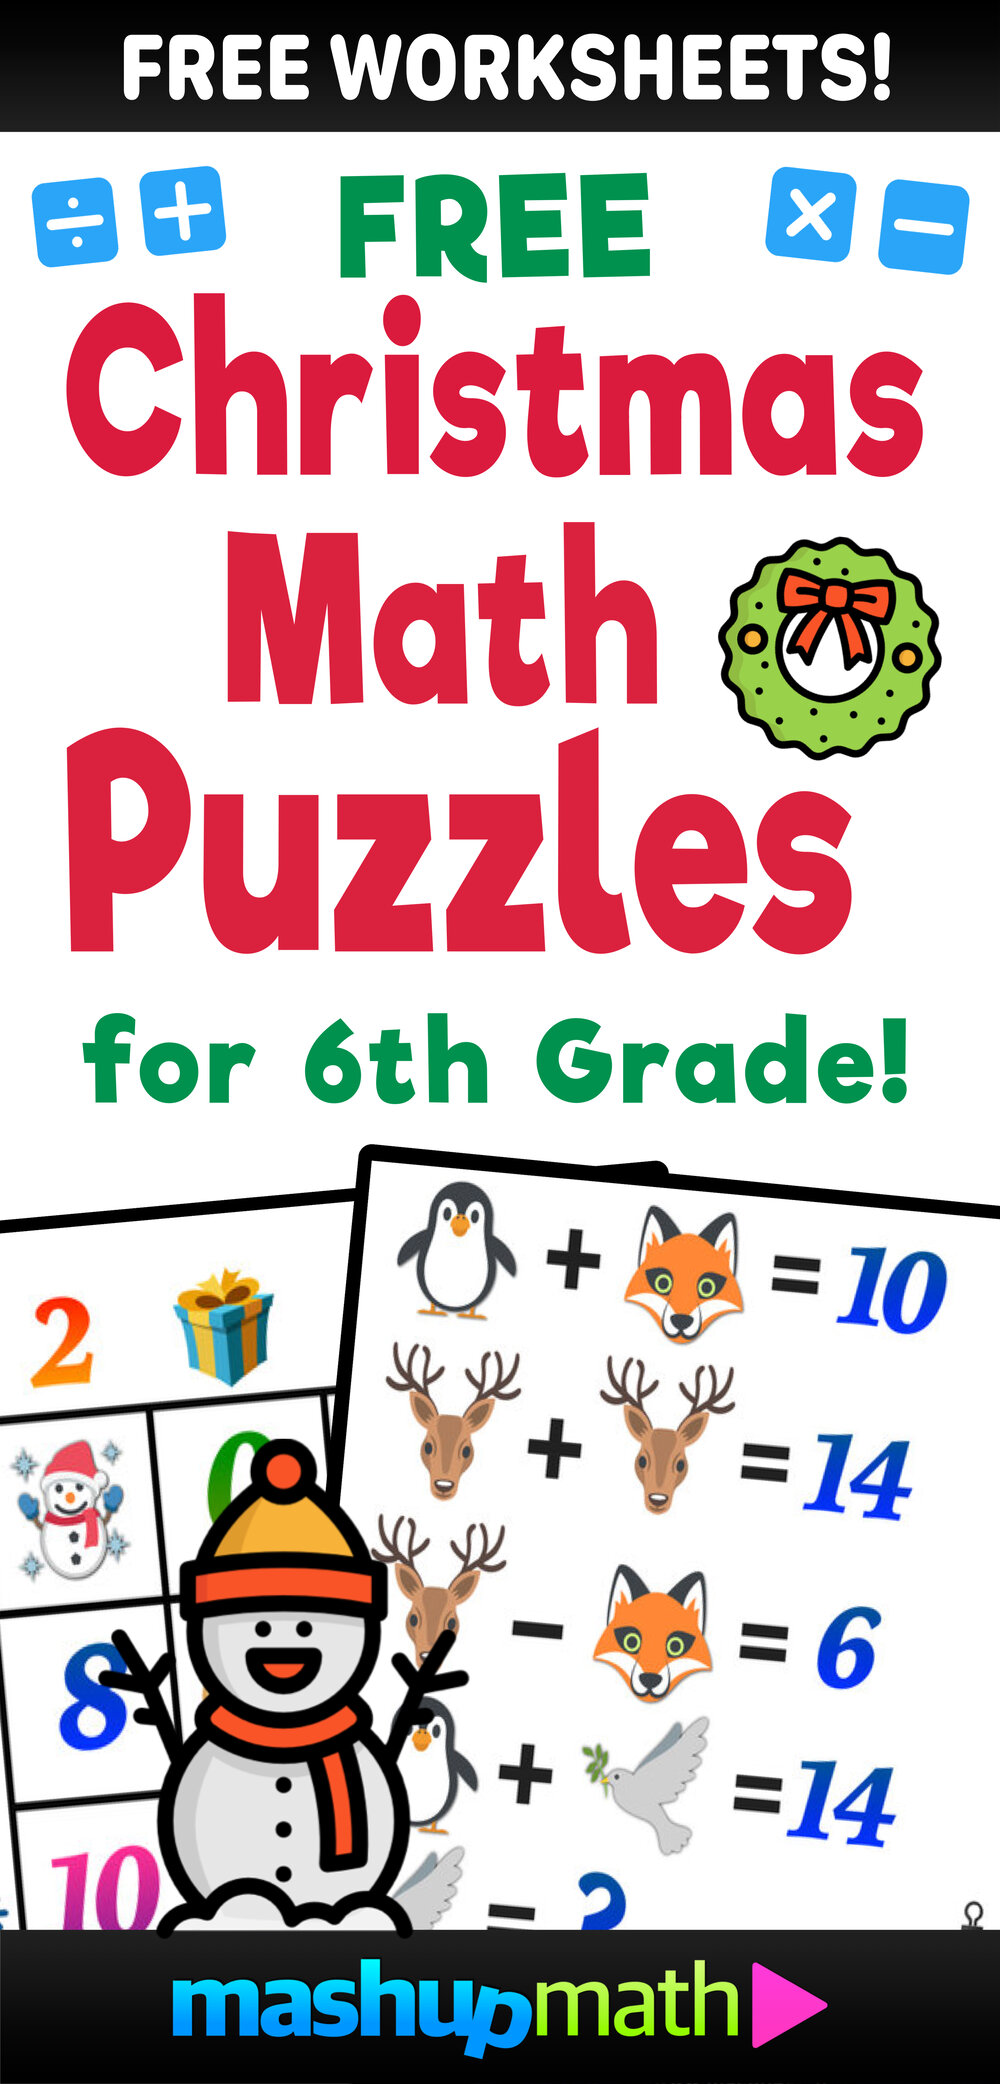 Are You Ready For 12 Days Of Holiday Math Challenges? — Mashup Math